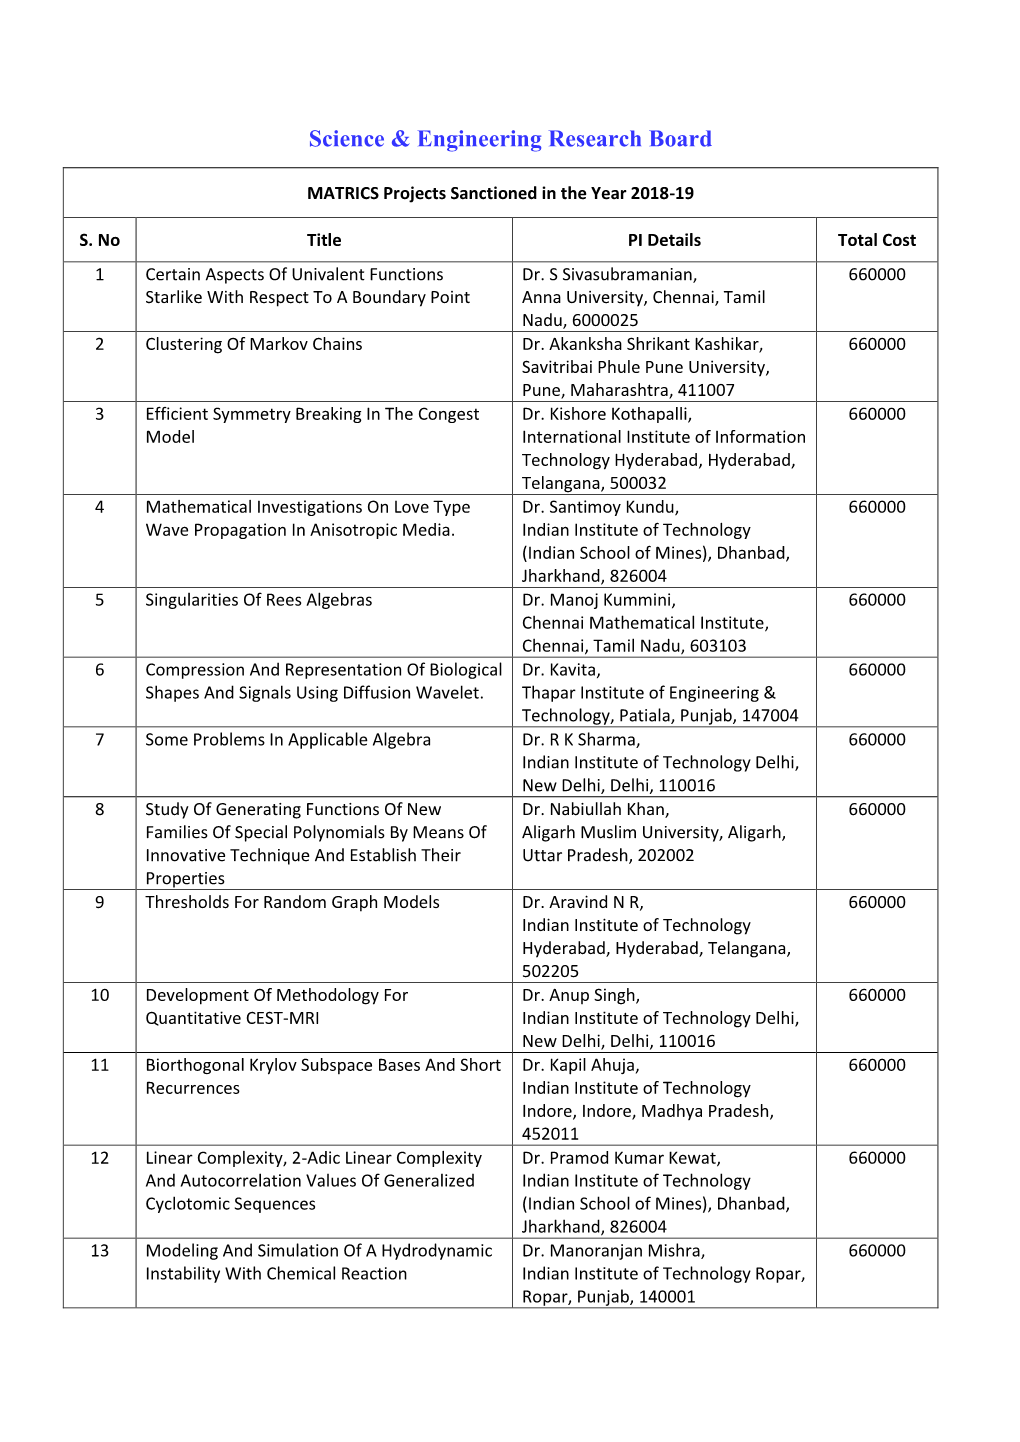 List of MATRICS Projects Funded by SERB During 2018-19